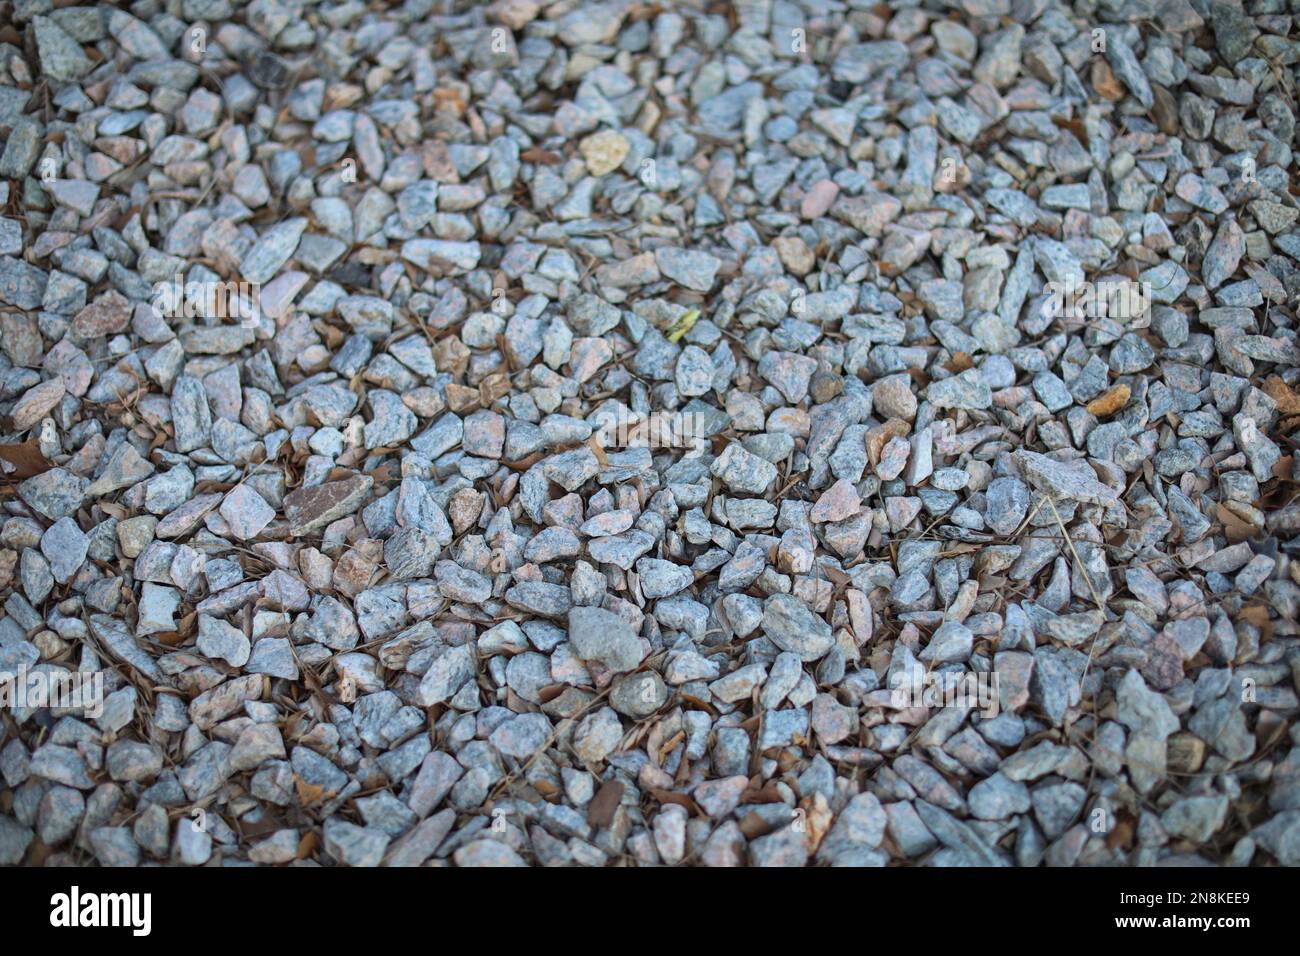 rocks on the ground textured material Stock Photo